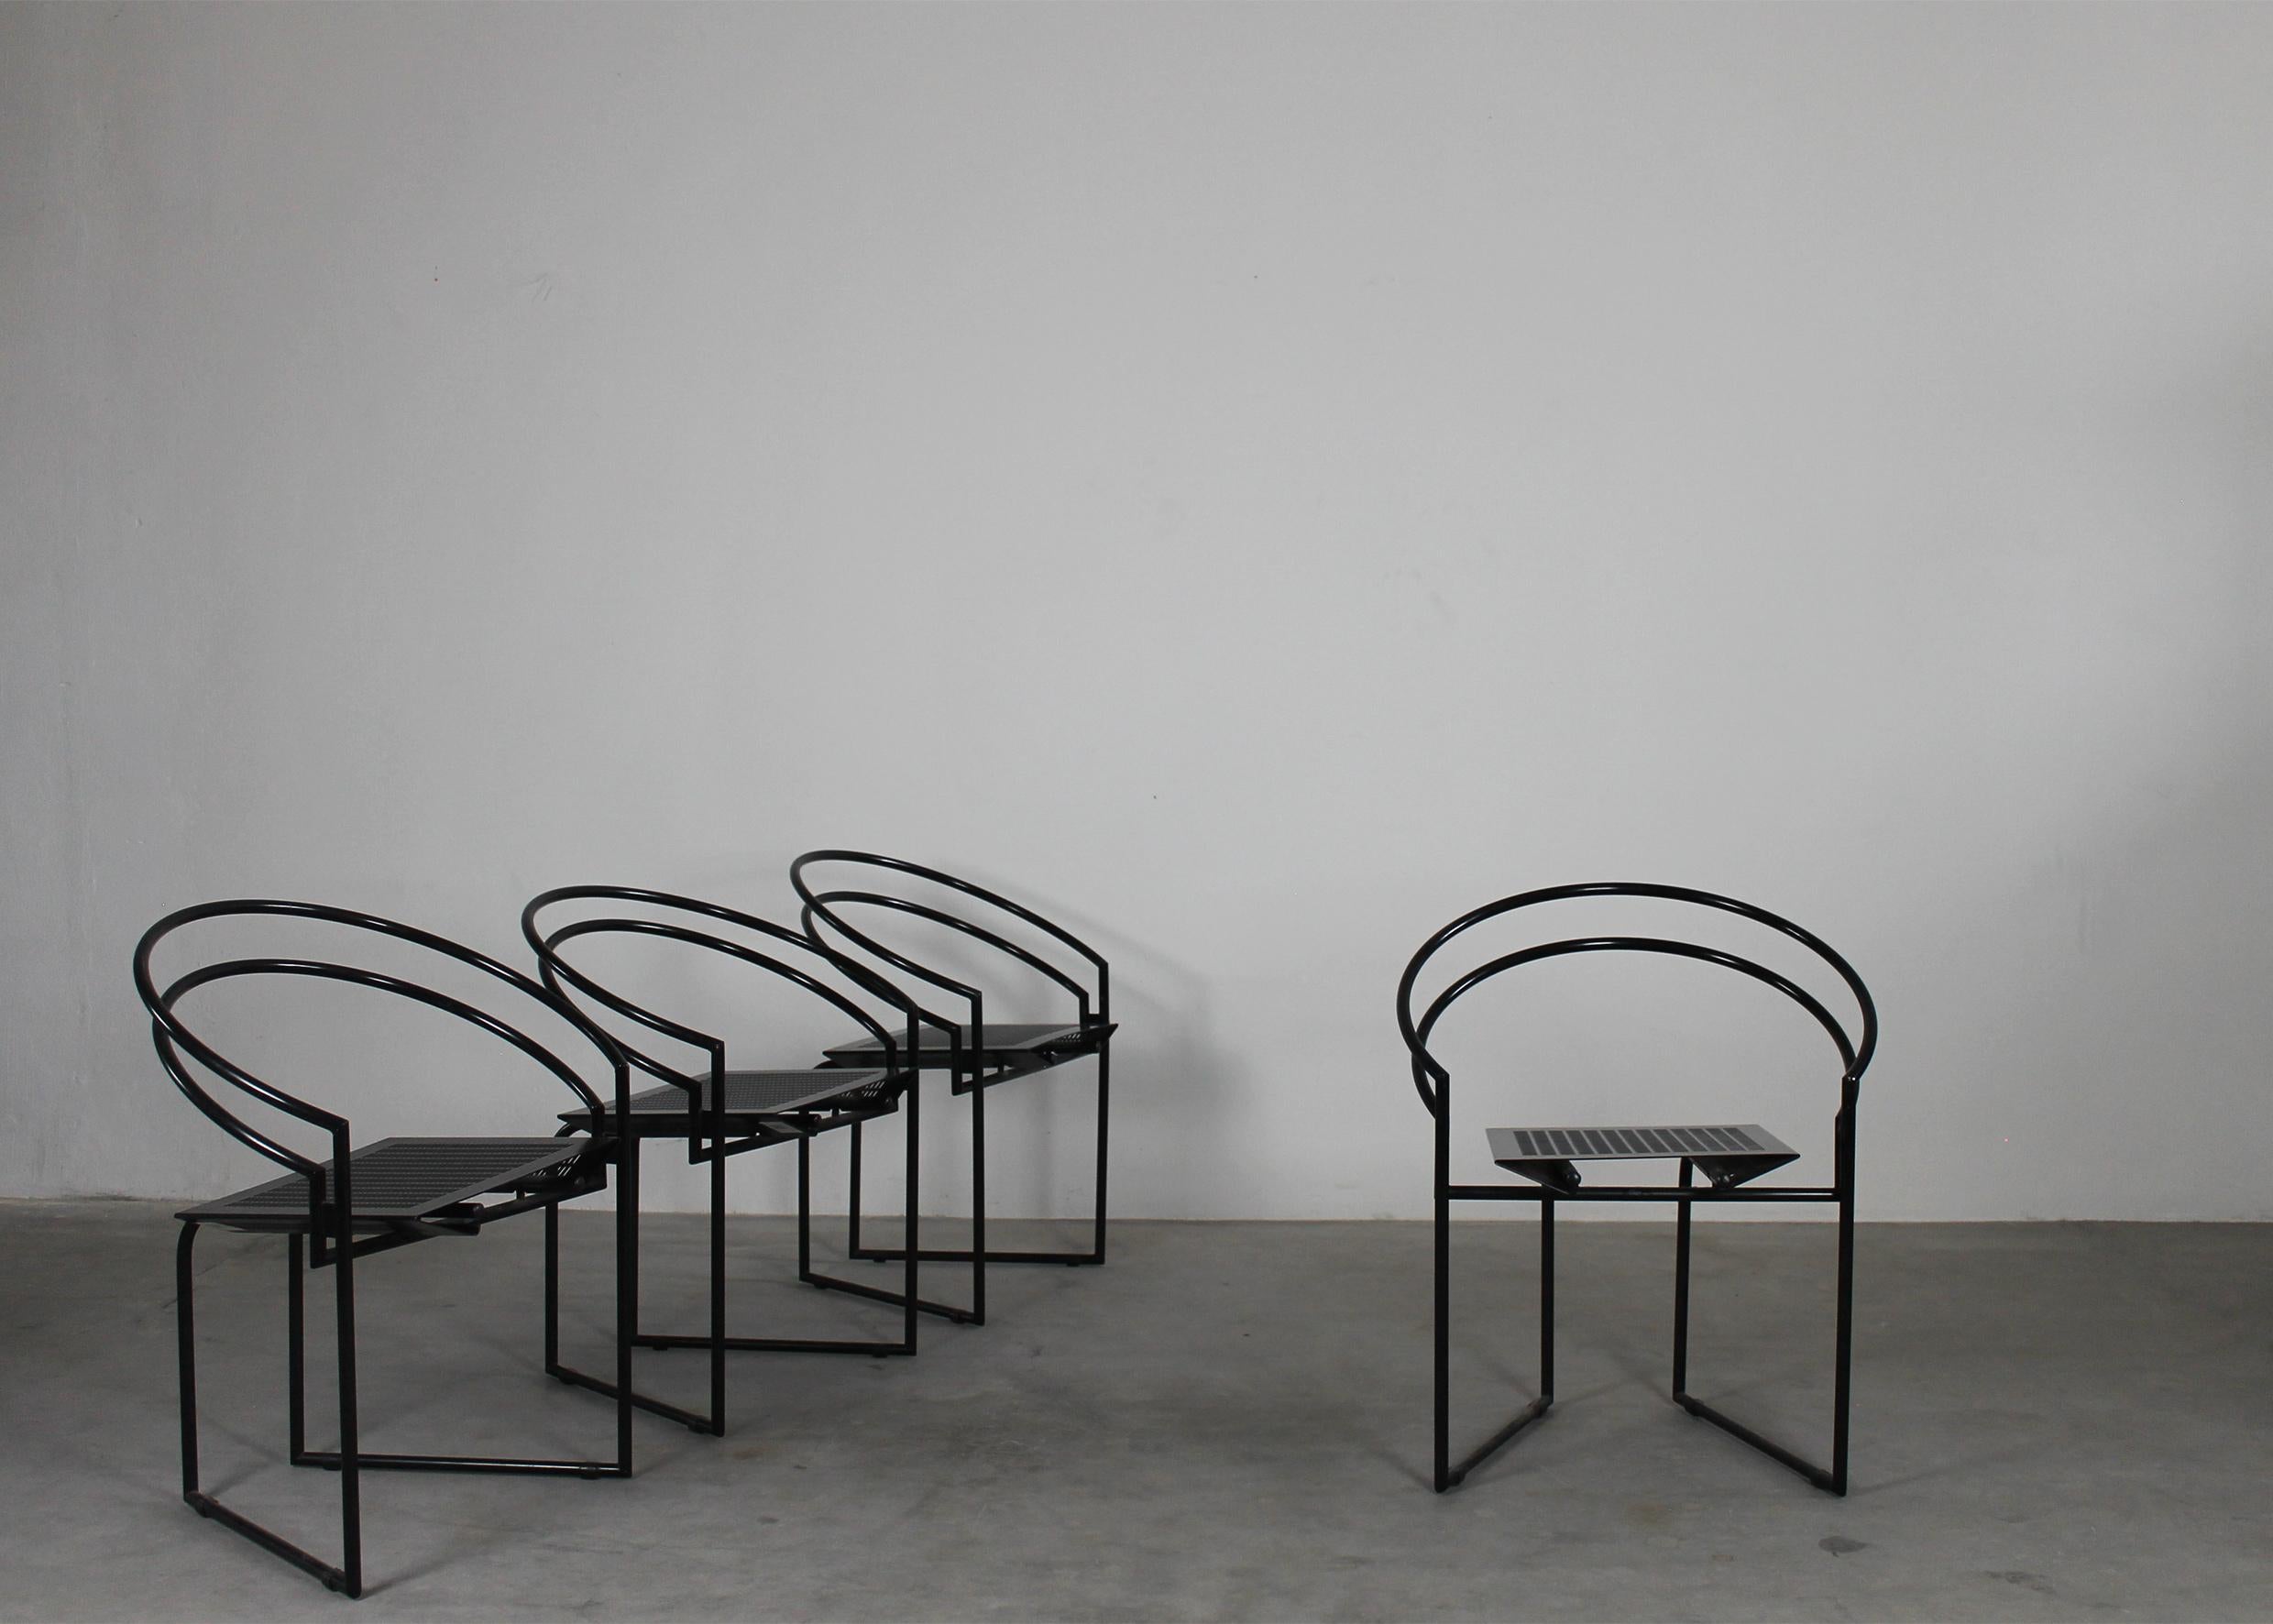 Set of four dining chairs 614 or La Tonda with a black lacquered steel rod frame, seats and backs in bent perforated sheet metal.
Designed by Mario Botta for Alias 1980s Italy. 

Mario Botta was born in 1943 in Mendrisio. After working as an